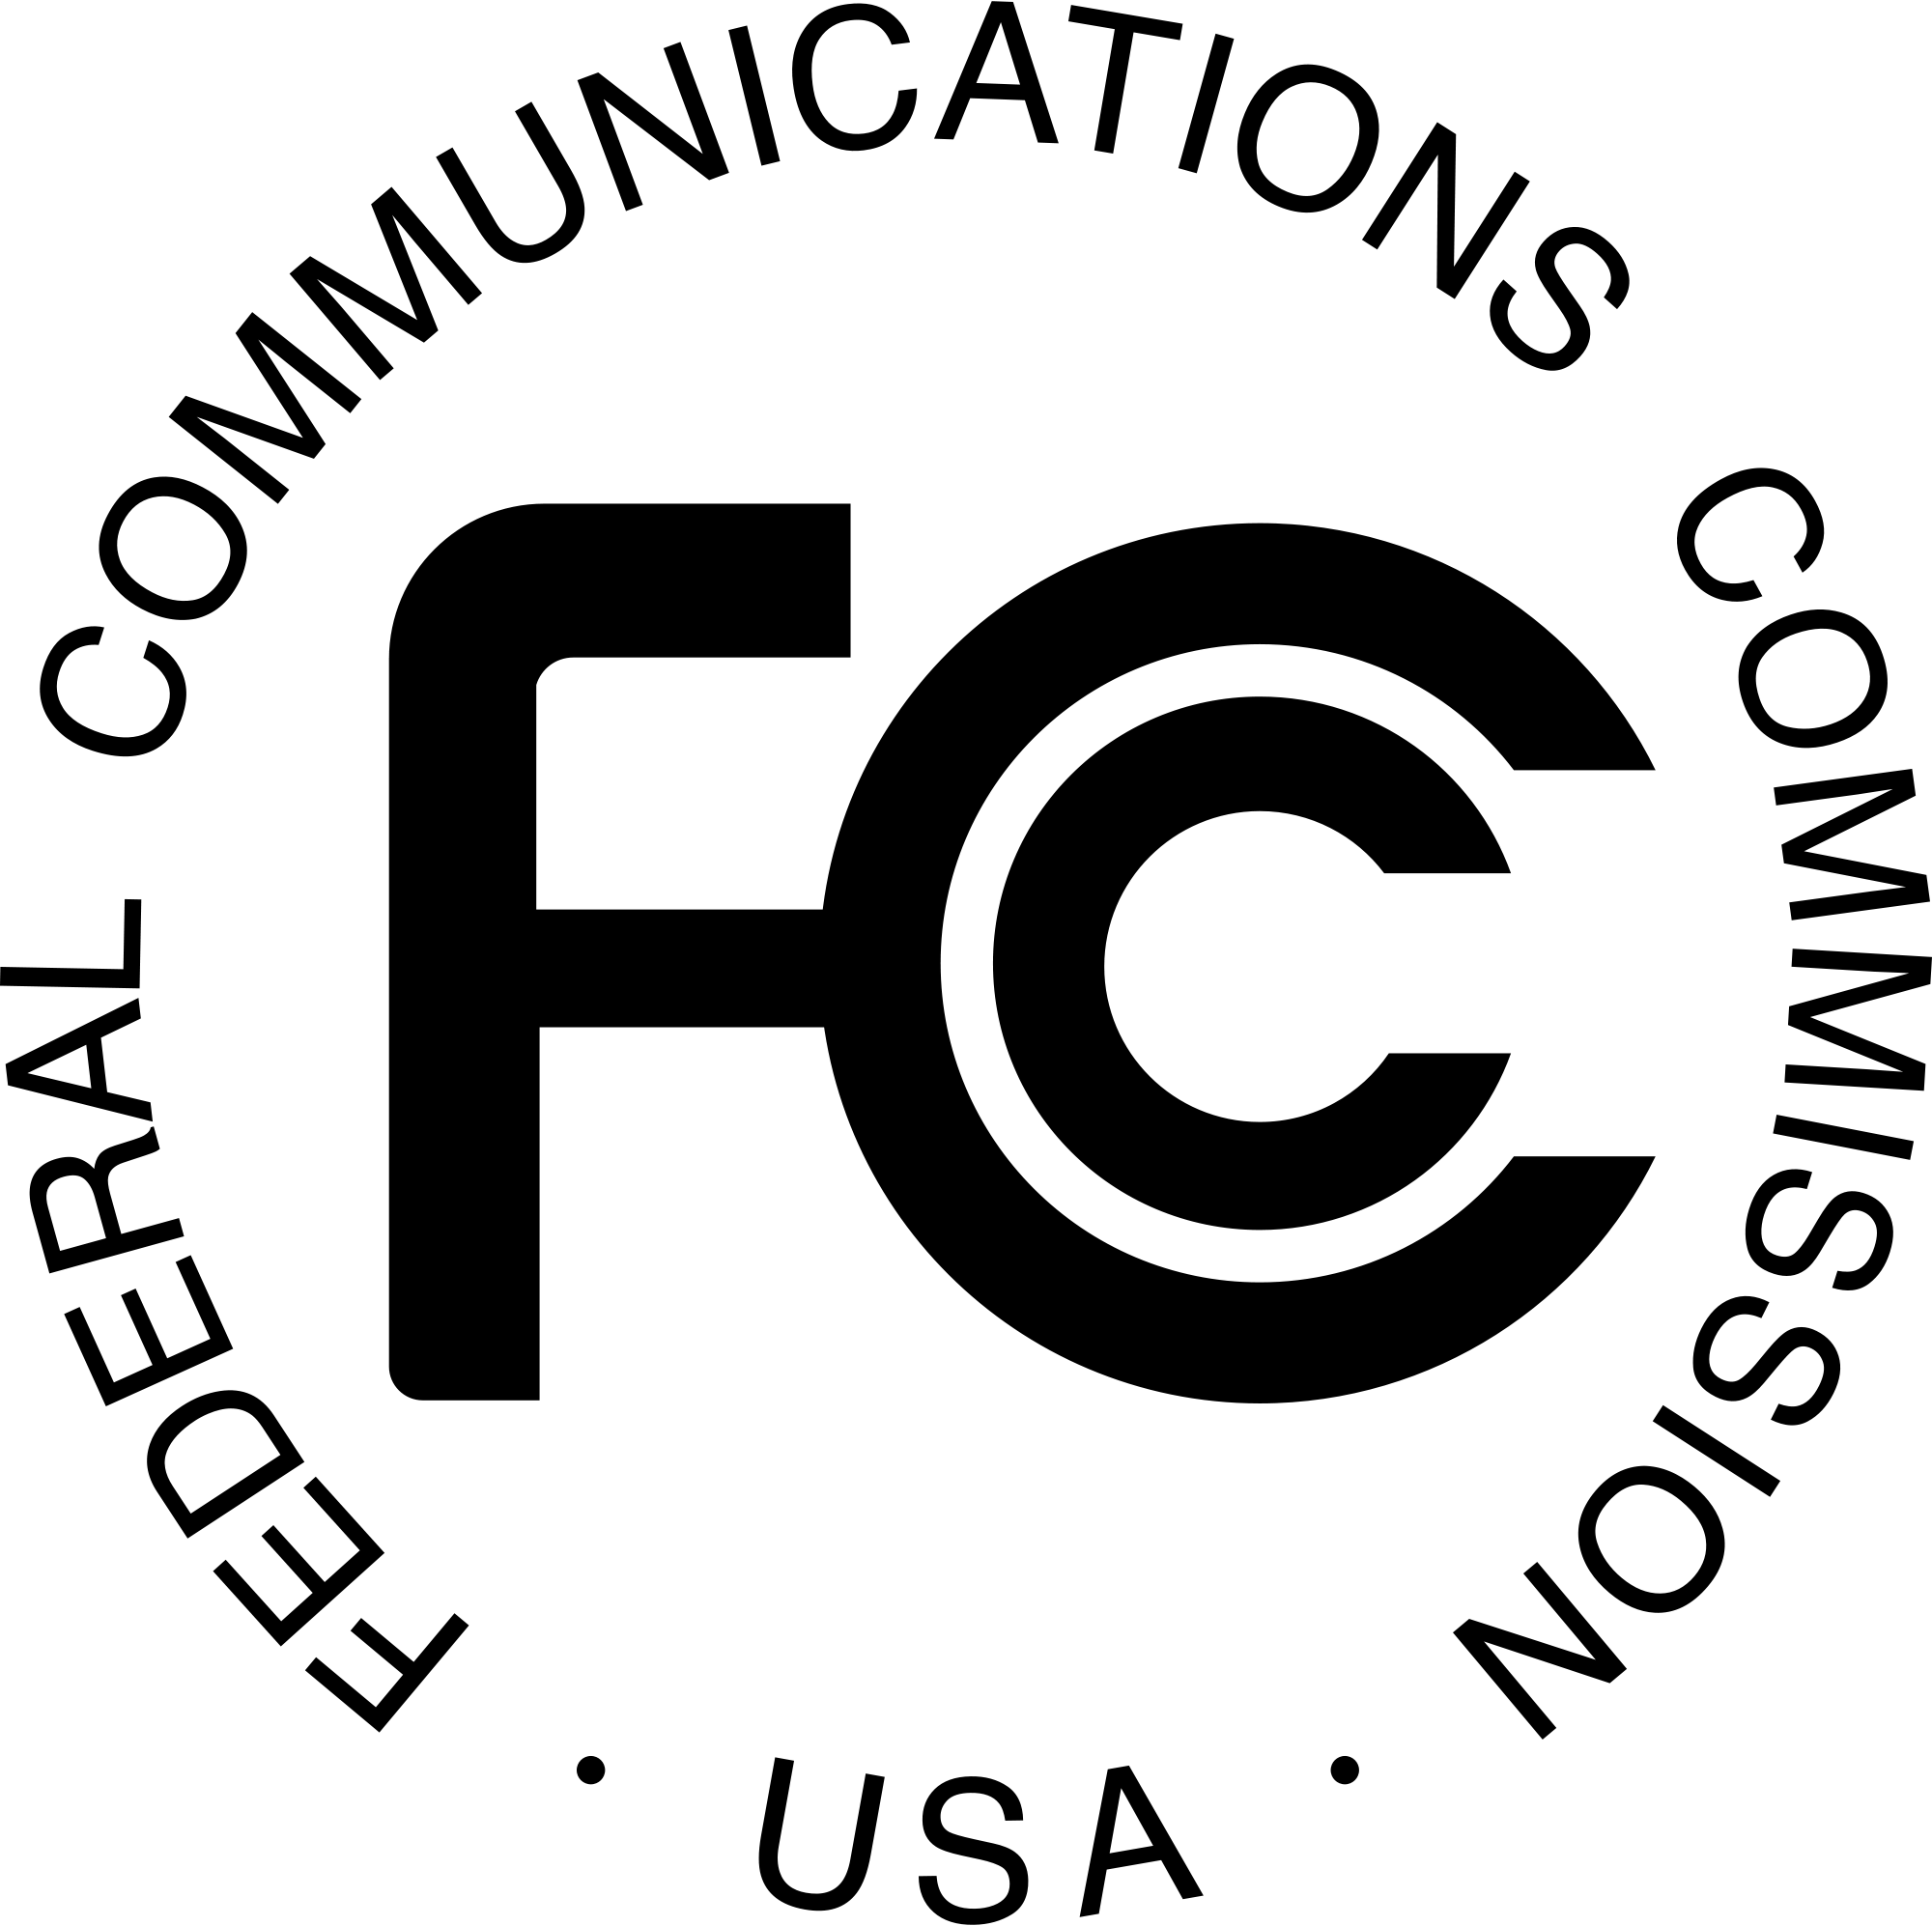 Old FCC Logo - Environmental Health Trust Outdated FCC “Safety” Standards ...